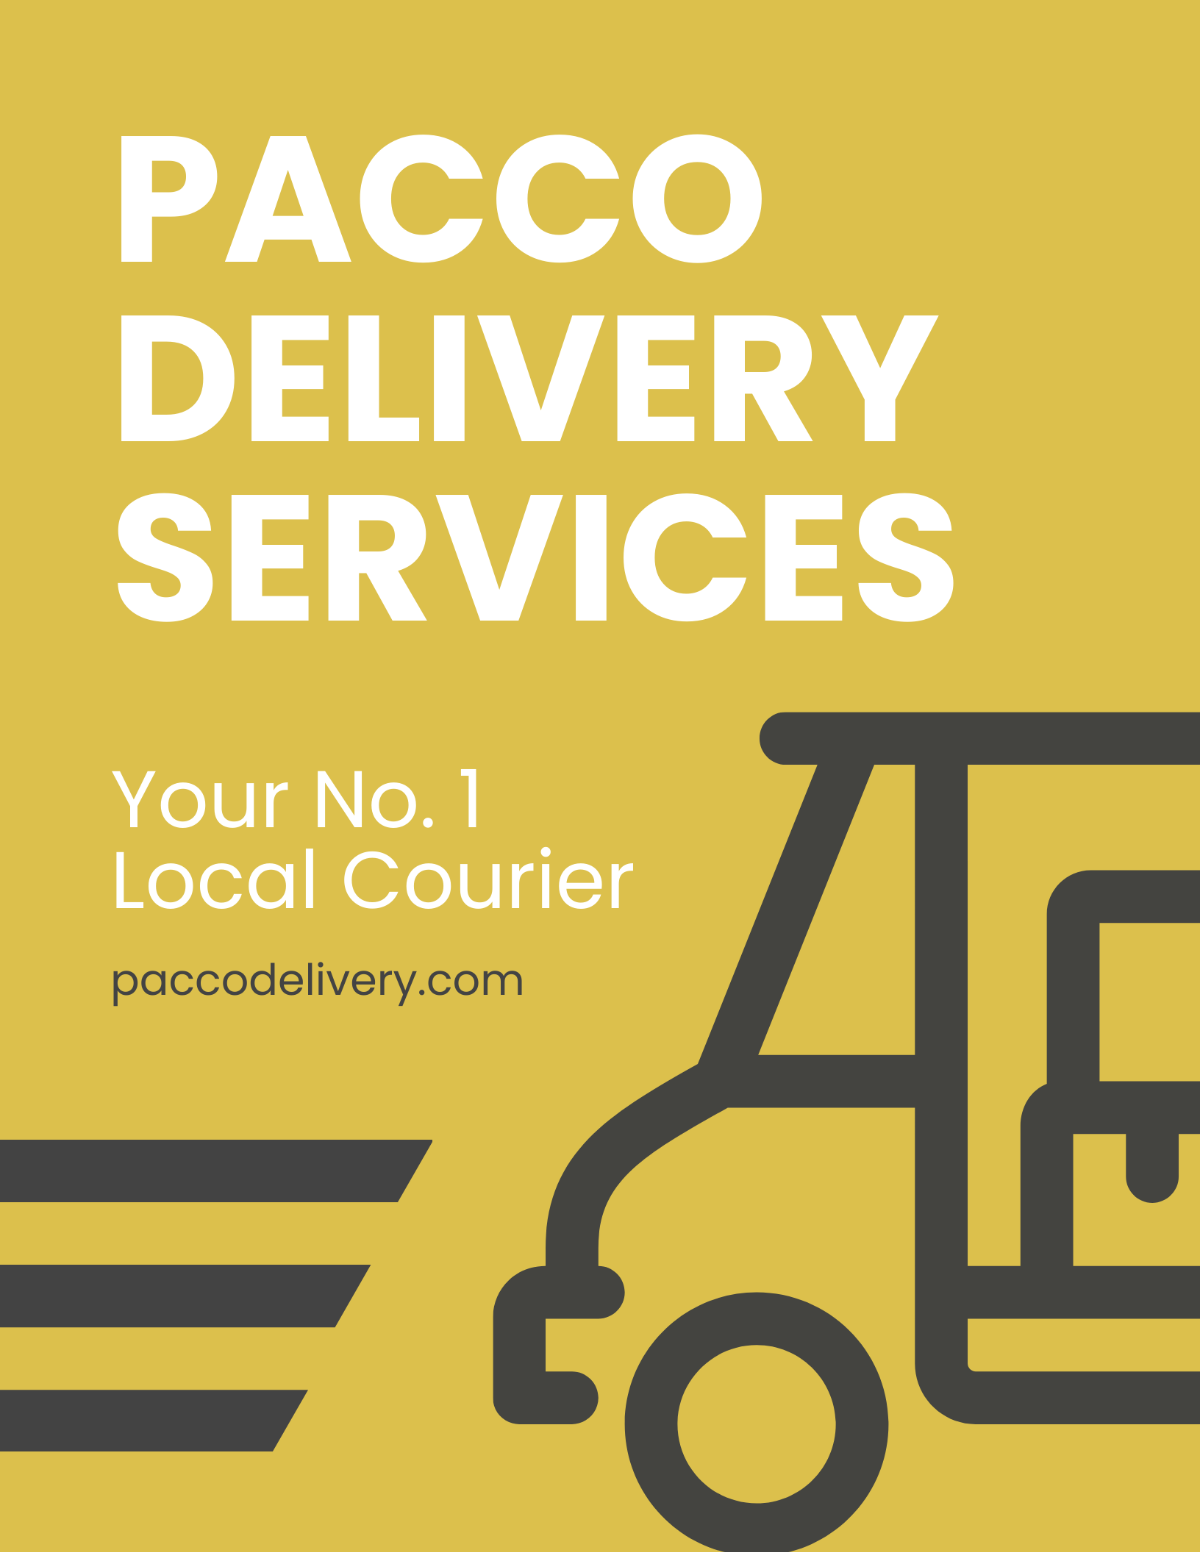 Free Package Delivery Flyer Template